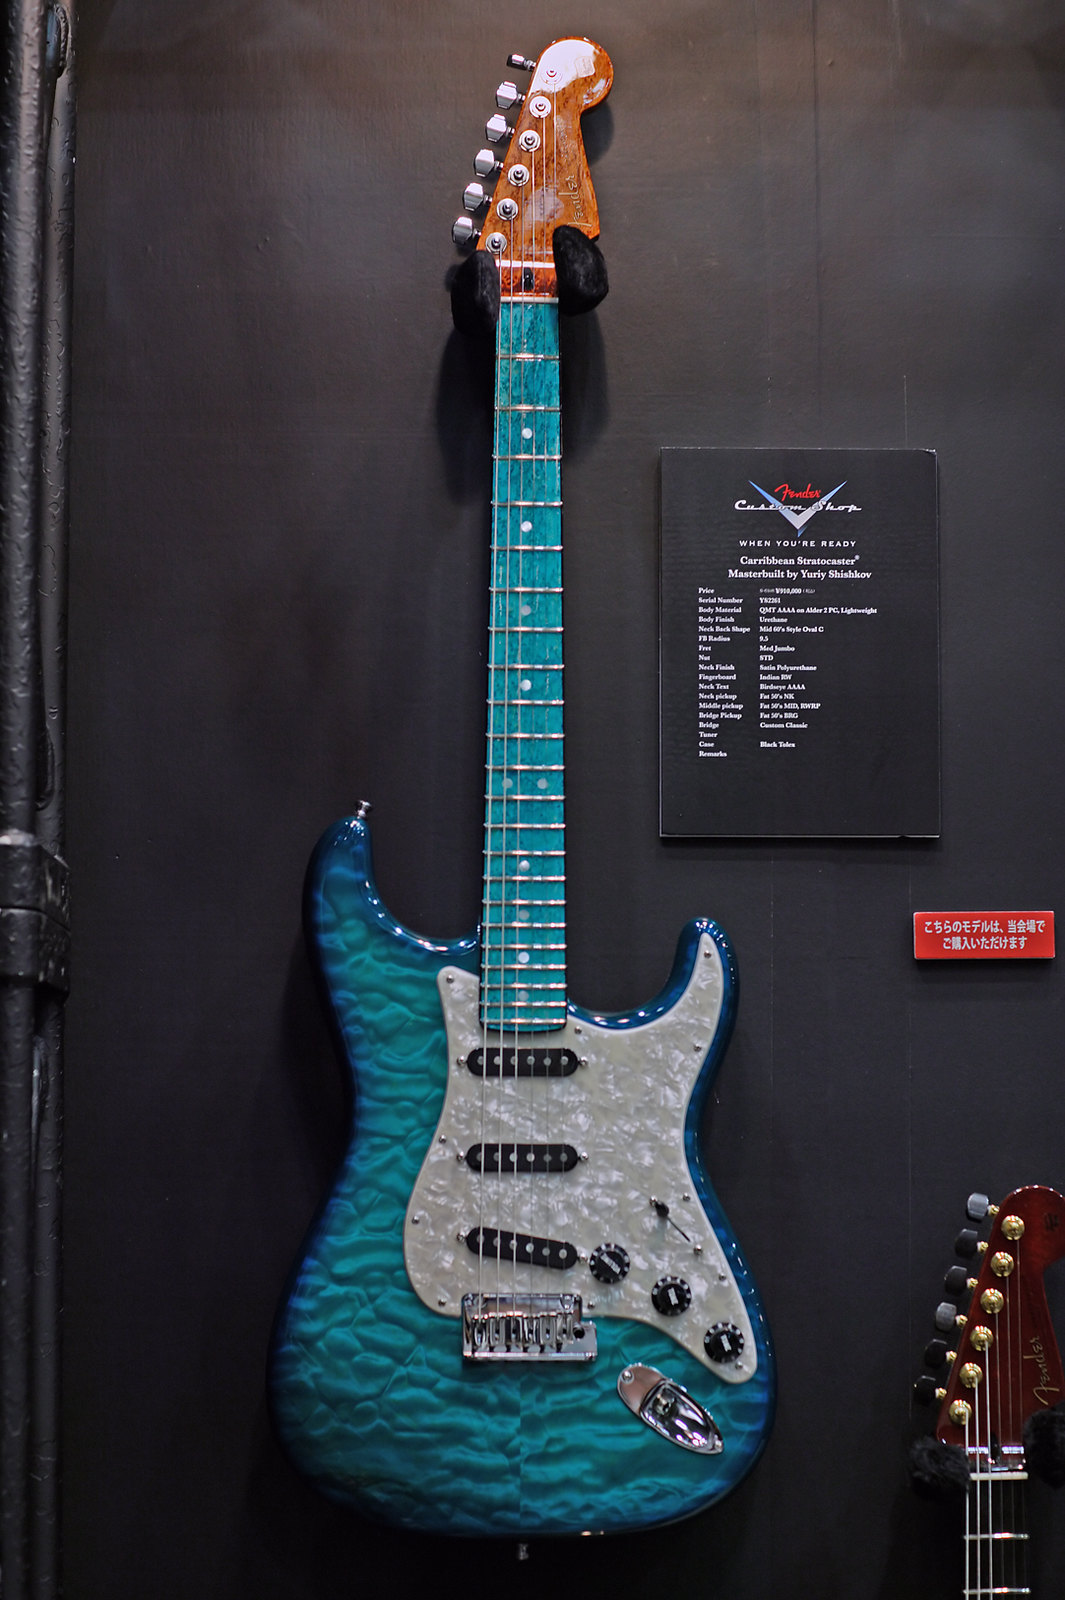 Wow, that quilted maple, the fretboard color matching the guitar body, amazing